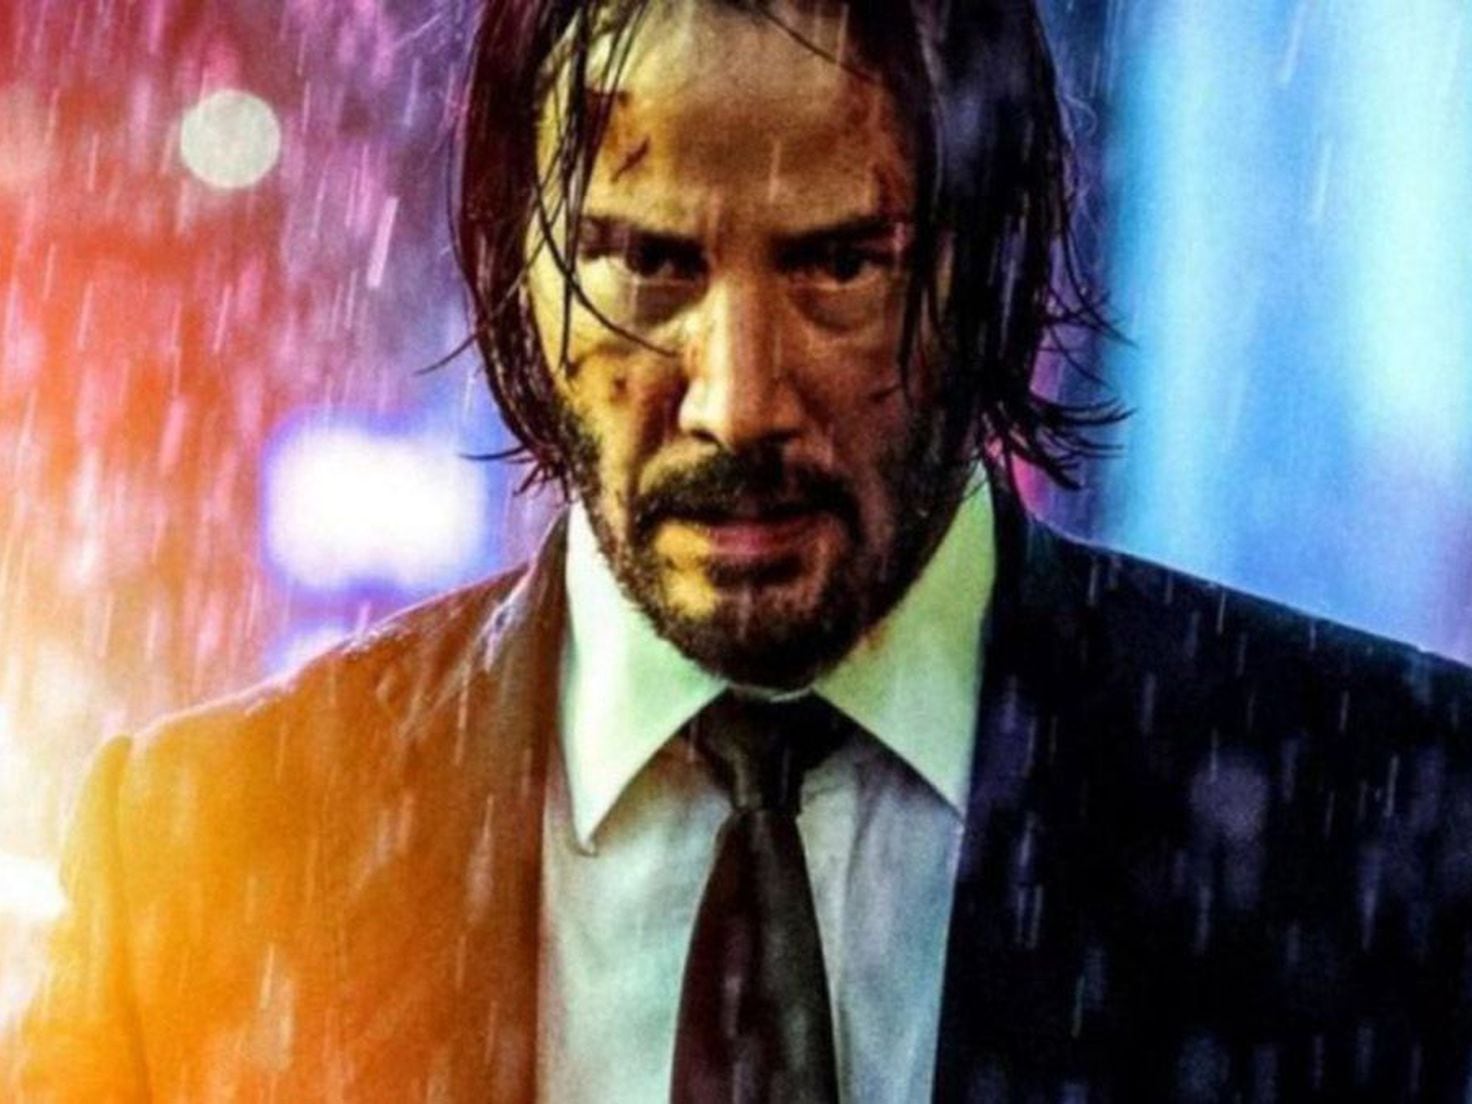 Every Major John Wick Character And Where We Saw Them Last